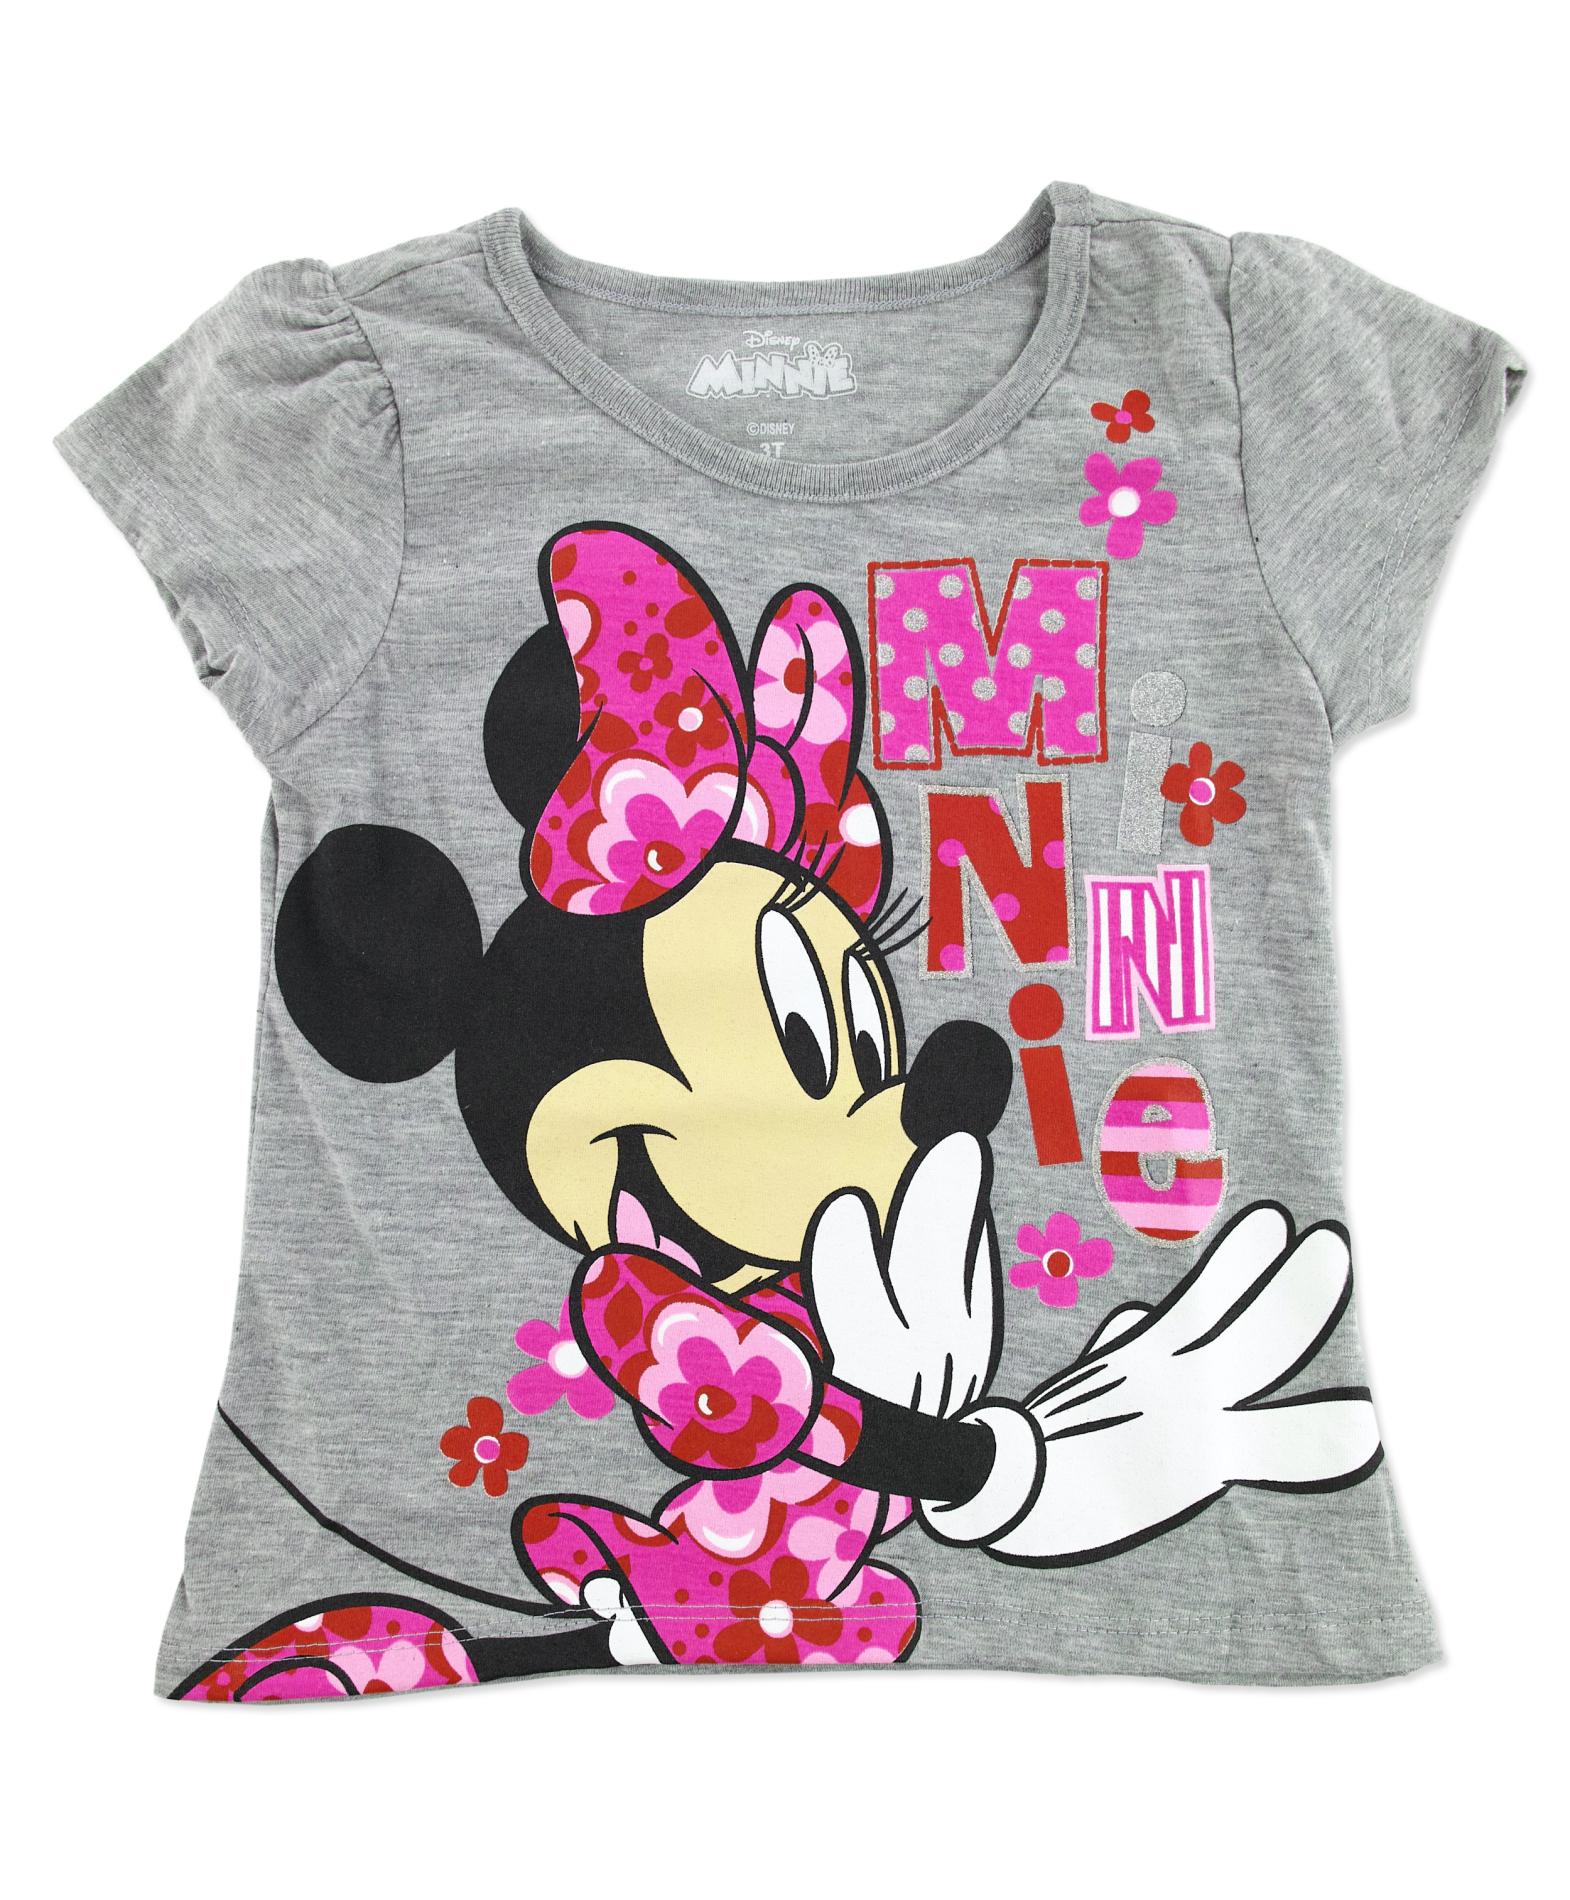 Disney Minnie Mouse Toddler Girl's Graphic T-Shirt - Floral